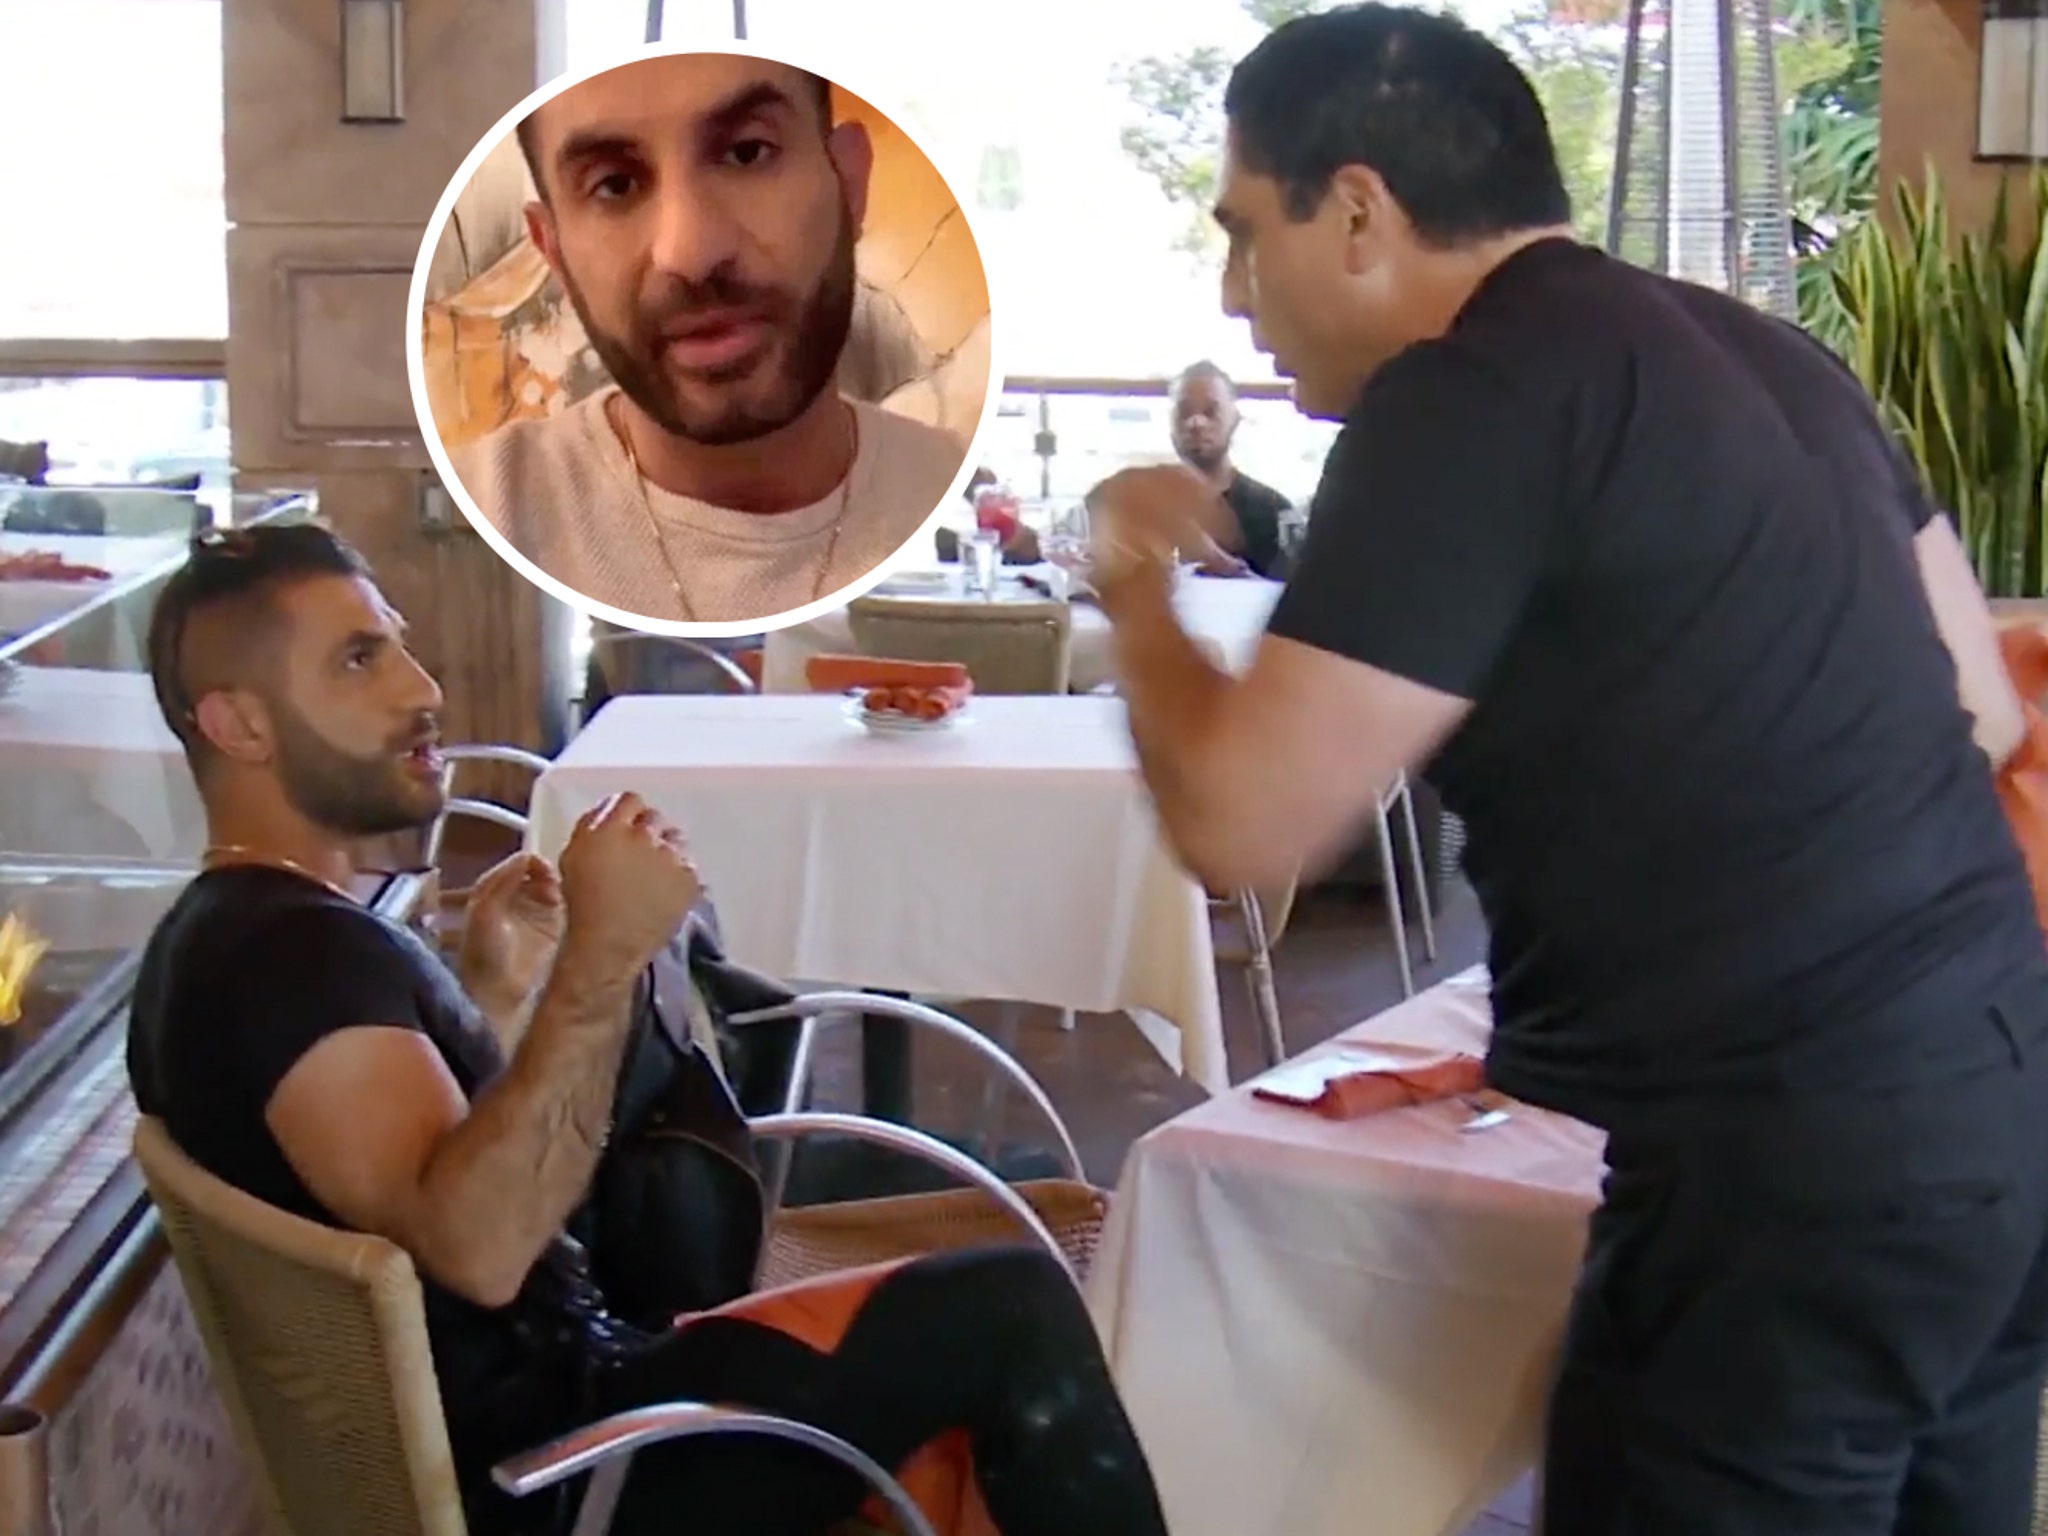 Shahs of Sunset: Ali Ashouri Shares His Side of the Story of MJ-Reza Feud